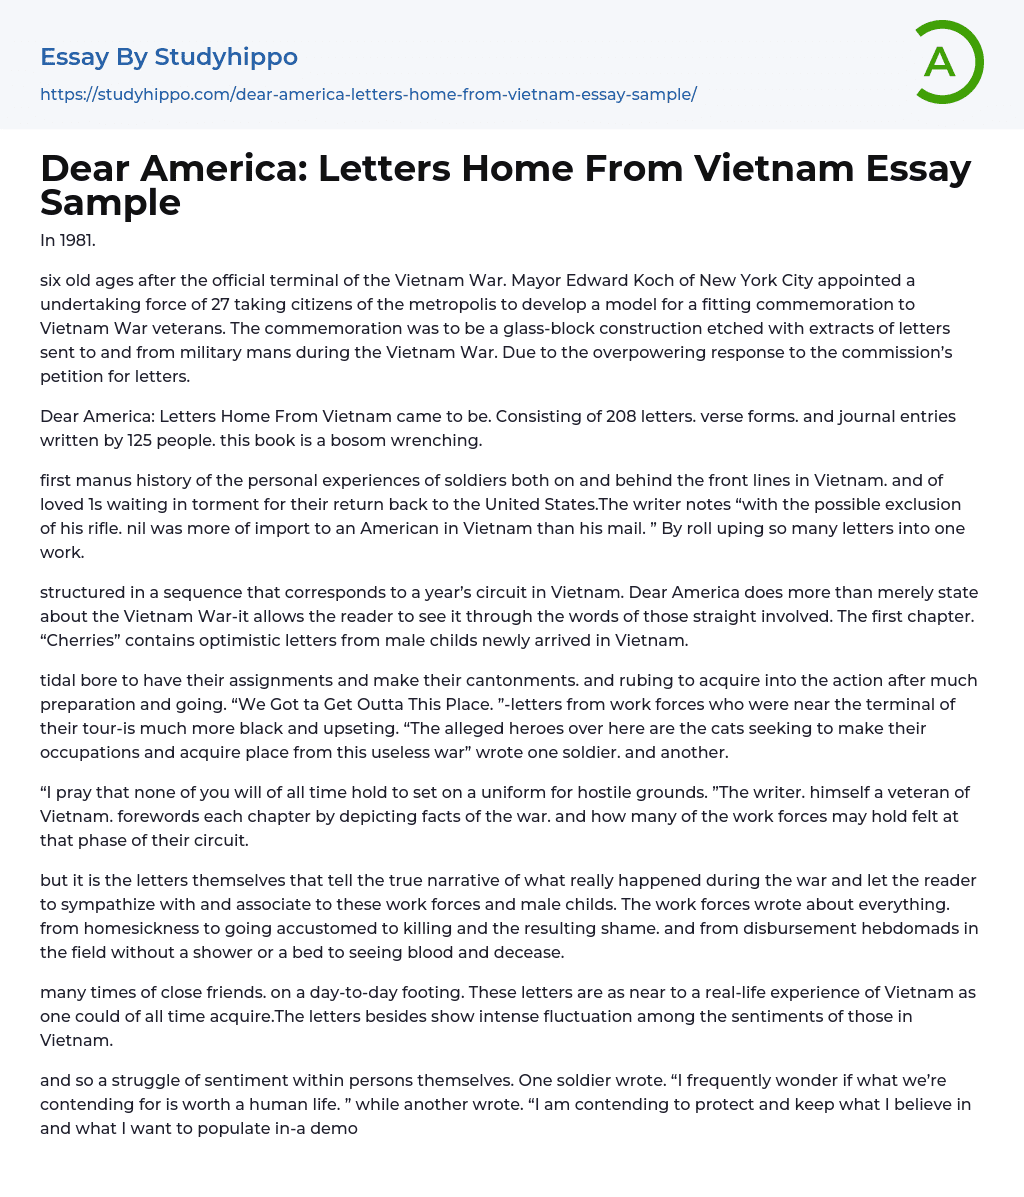 Dear America: Letters Home From Vietnam Essay Sample